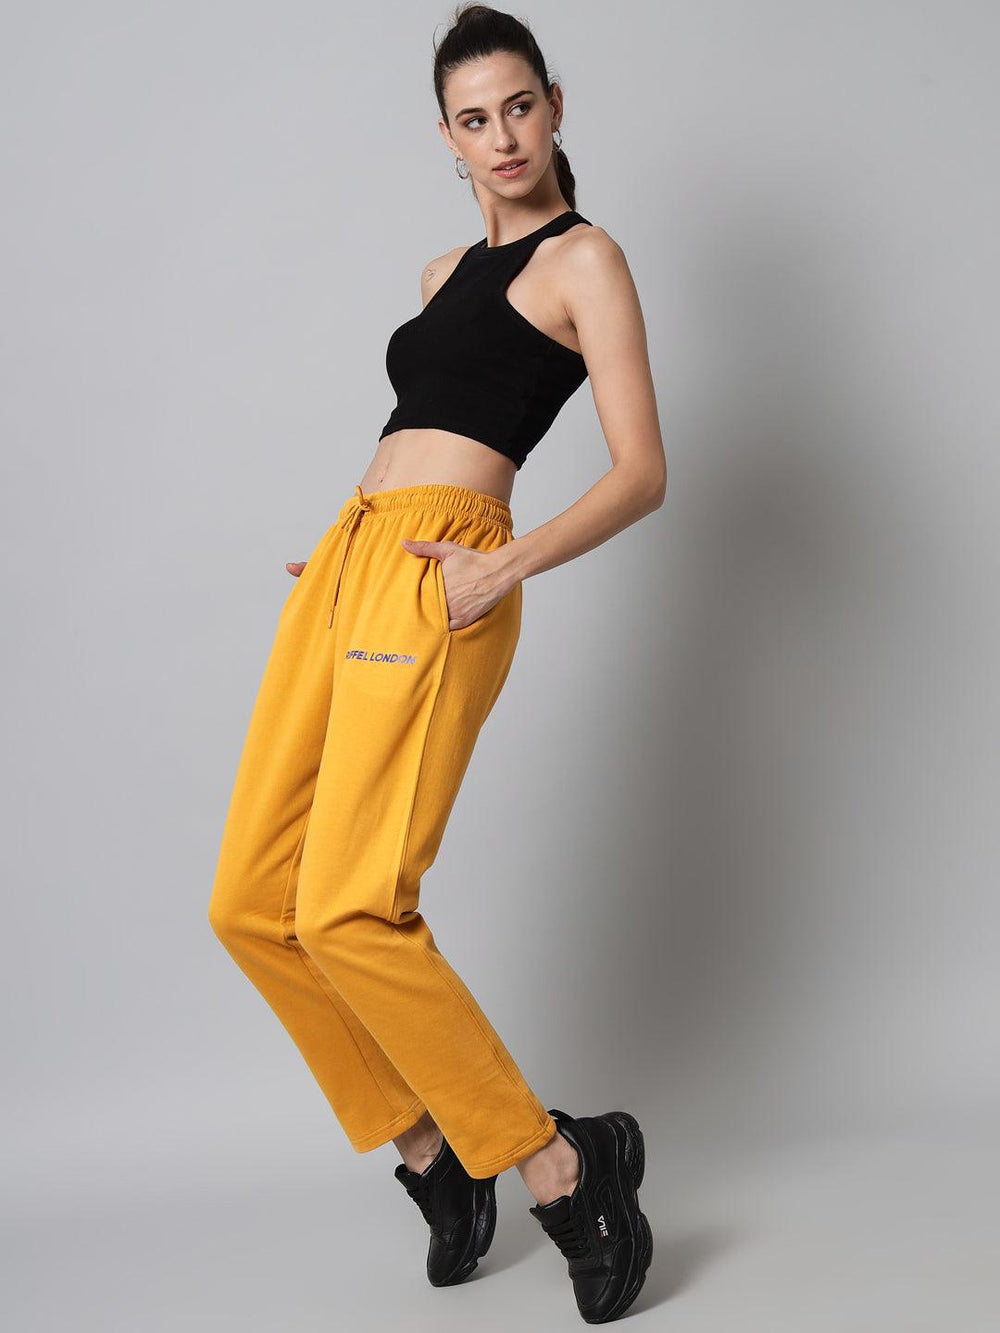 Griffel Women’s Front Logo Basic Solid Mustard Trackpant - griffel